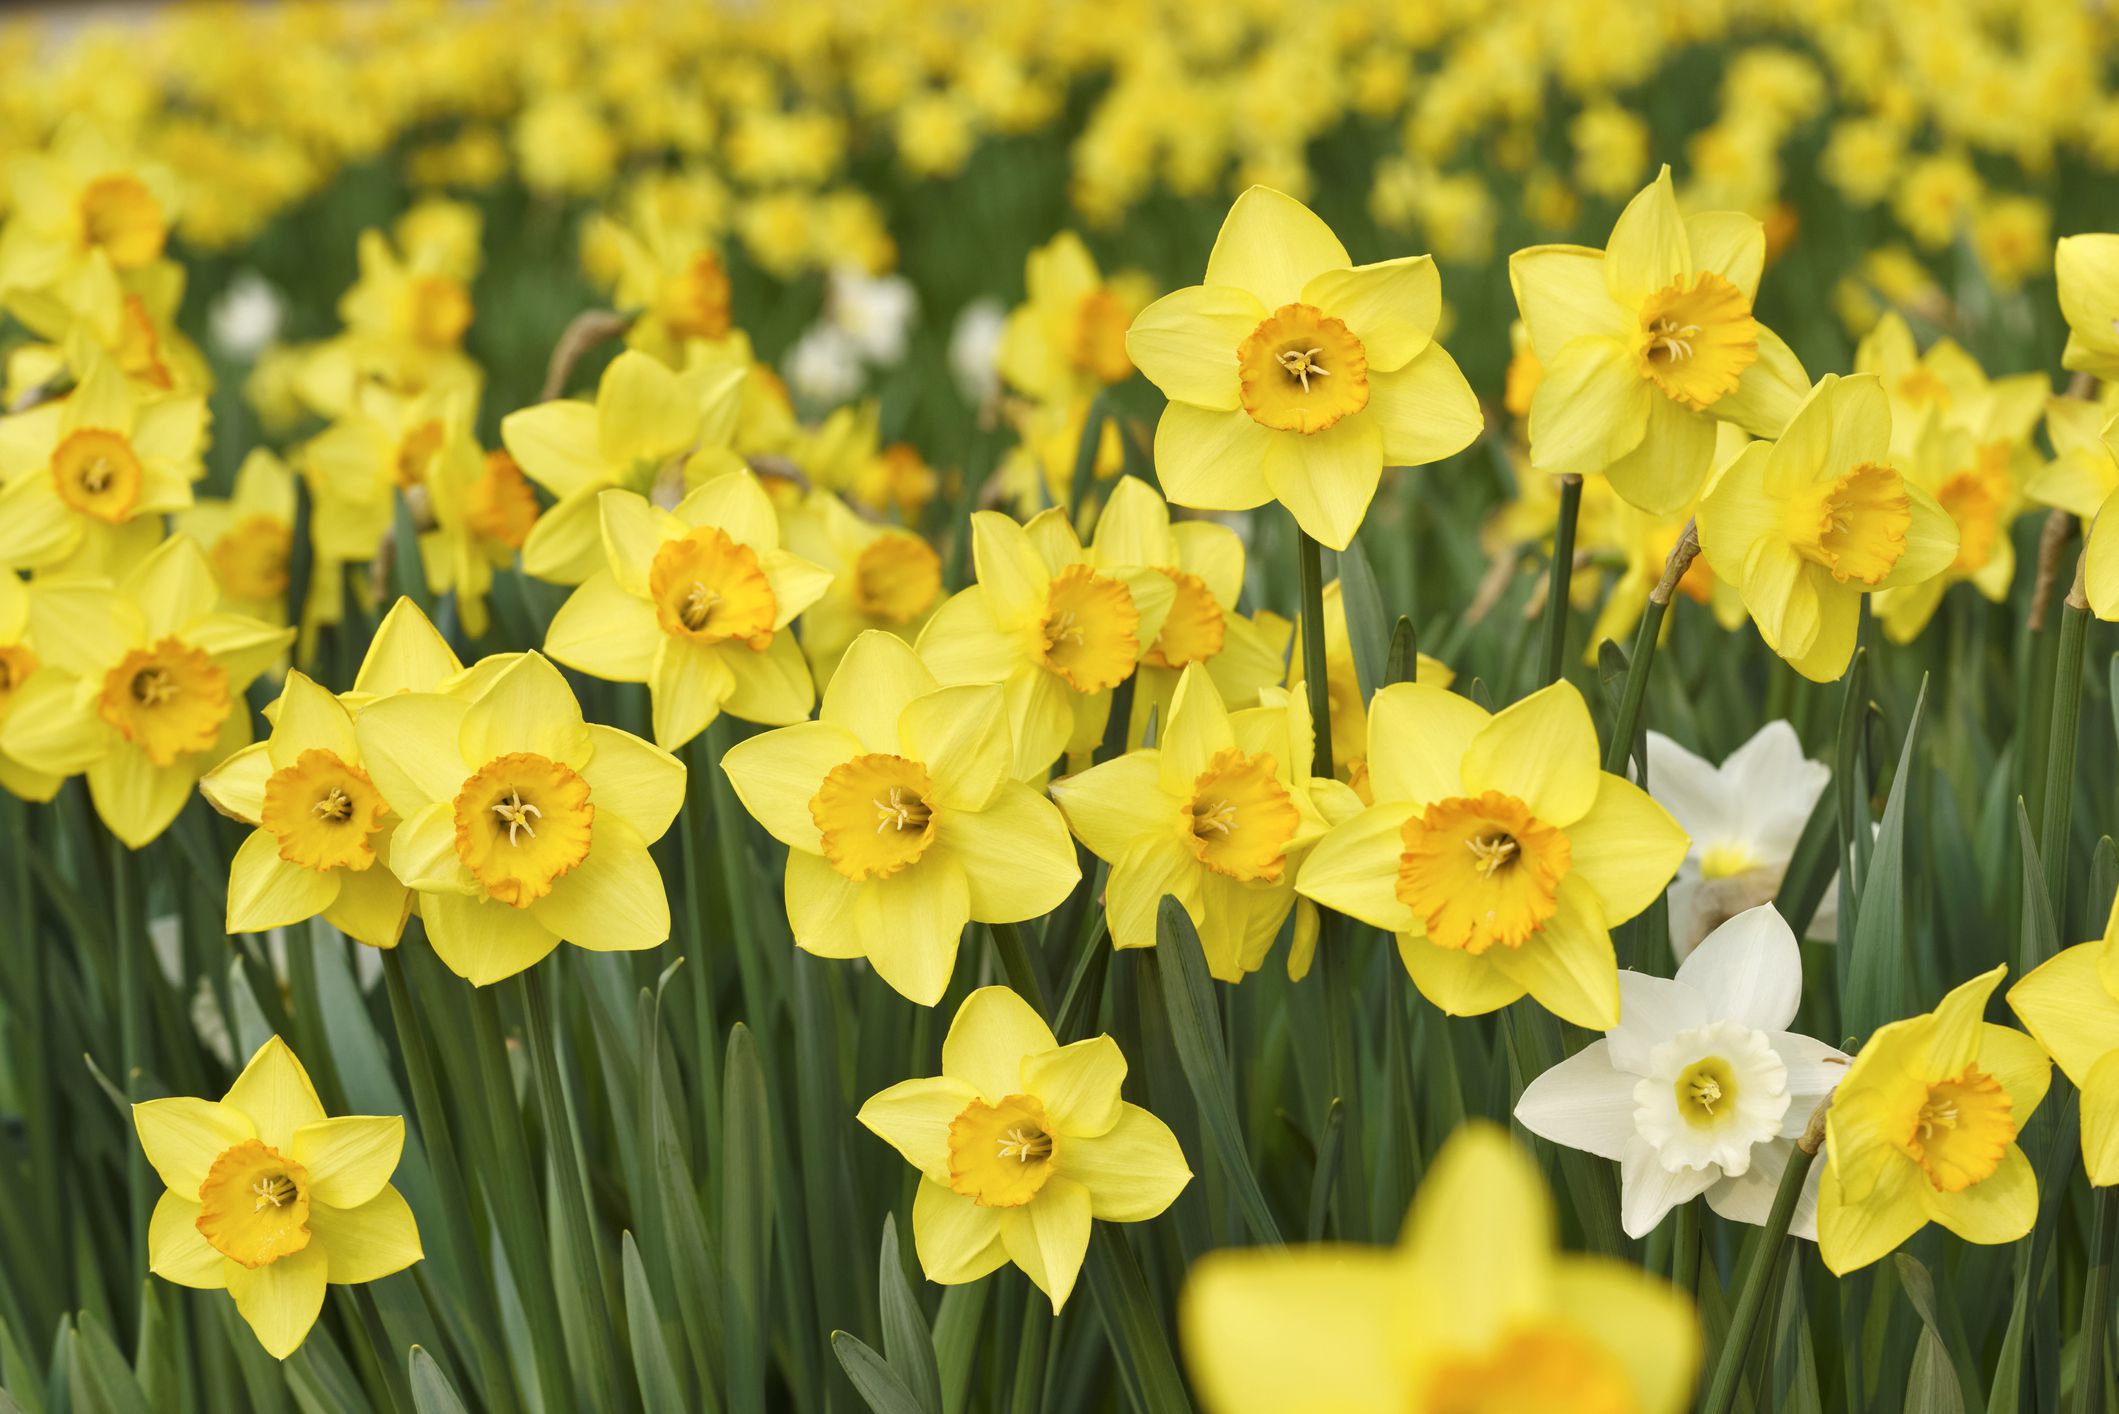 <p>Daffodil flowers contain <a href="https://www.sciencedirect.com/topics/pharmacology-toxicology-and-pharmaceutical-science/lycorine">lycorine</a>, which triggers vomiting when ingested. The bulbs, in particular, contain crystals that can cause gastrointestinal irritation and drooling in dogs, horses, and cats. Ingestion of any part of the plant can cause vomiting, diarrhea, abdominal pain, and even cardiac and respiratory problems. </p>